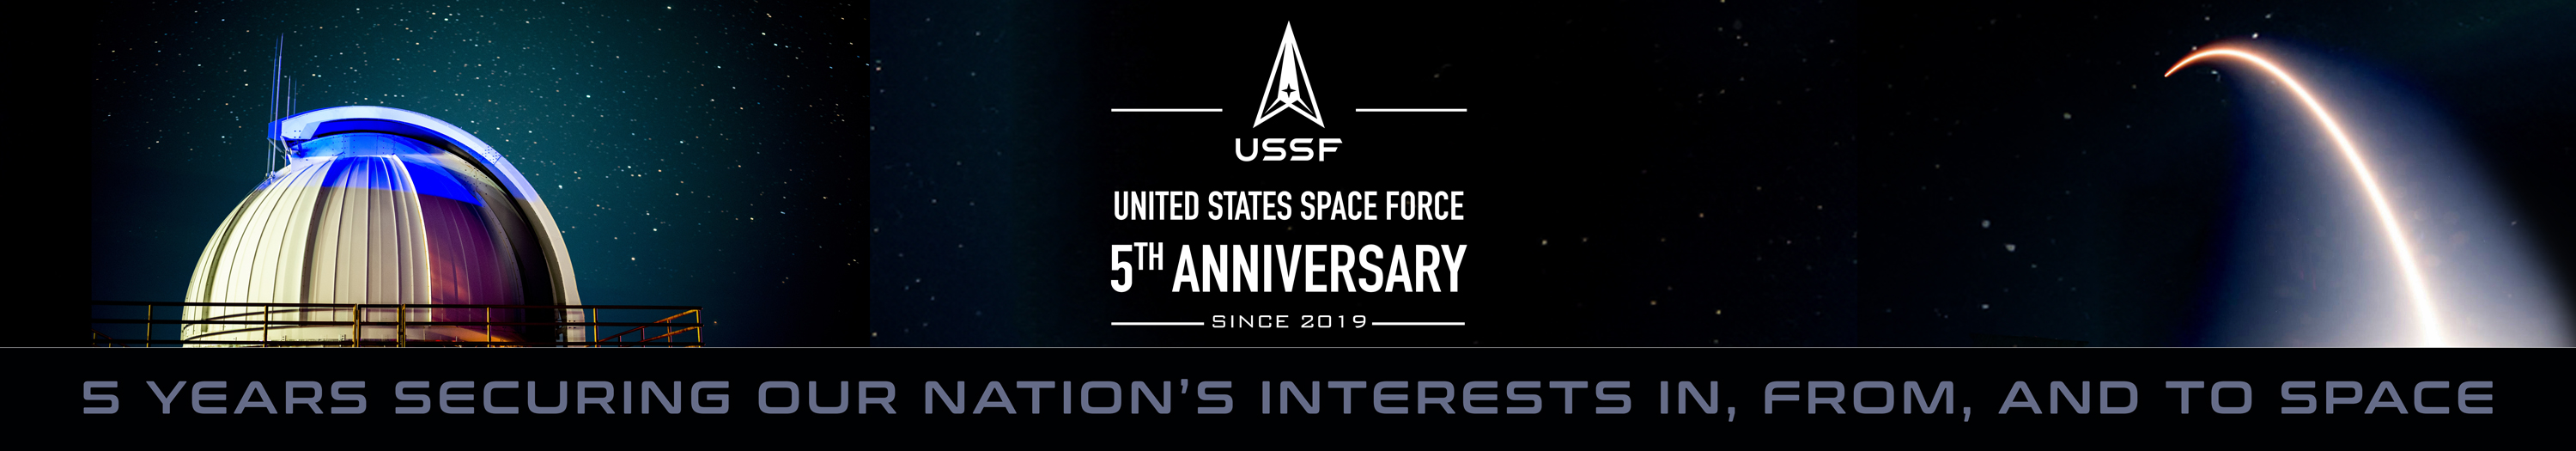 The United States Space Force fifth anniversary